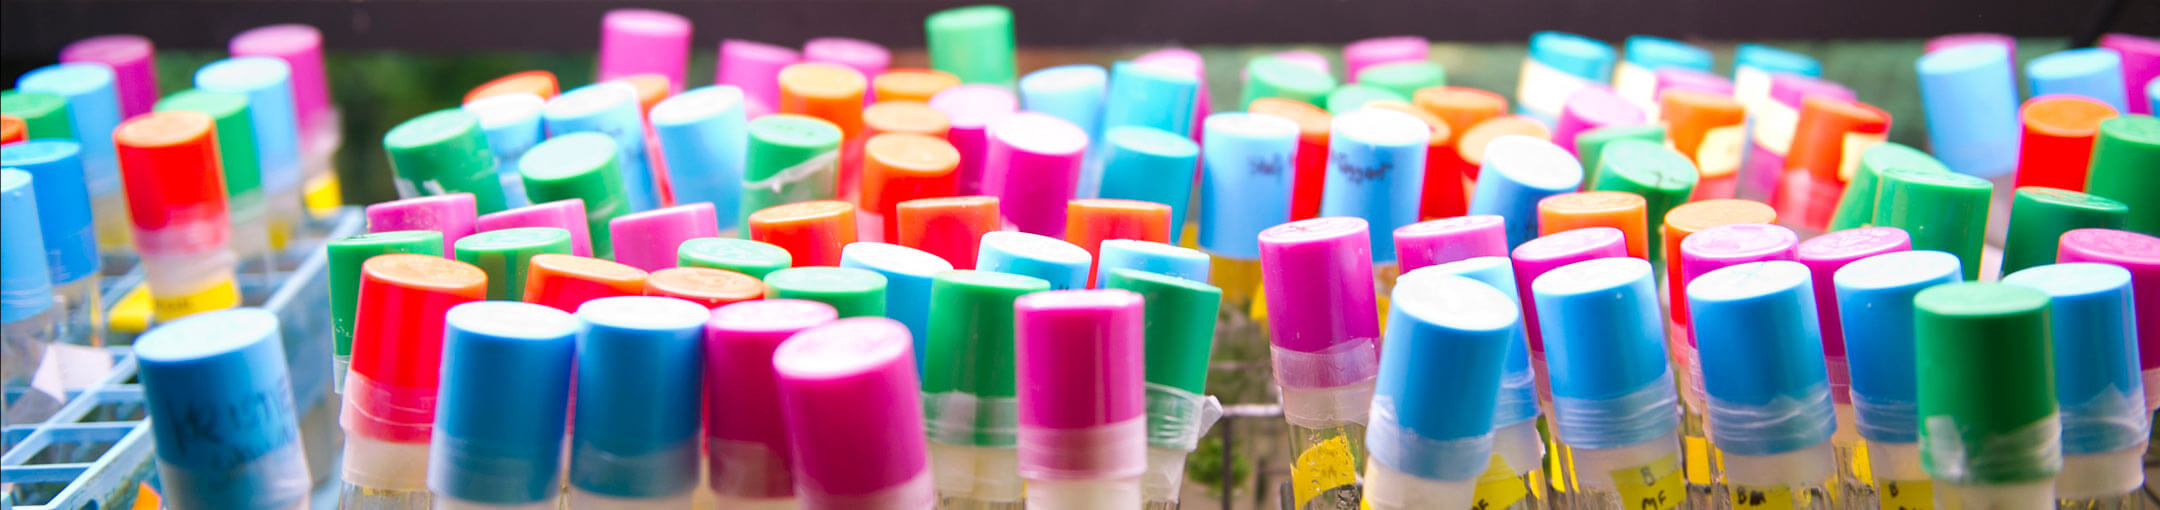 Close up of test tubes with a variety of colored stopper caps.